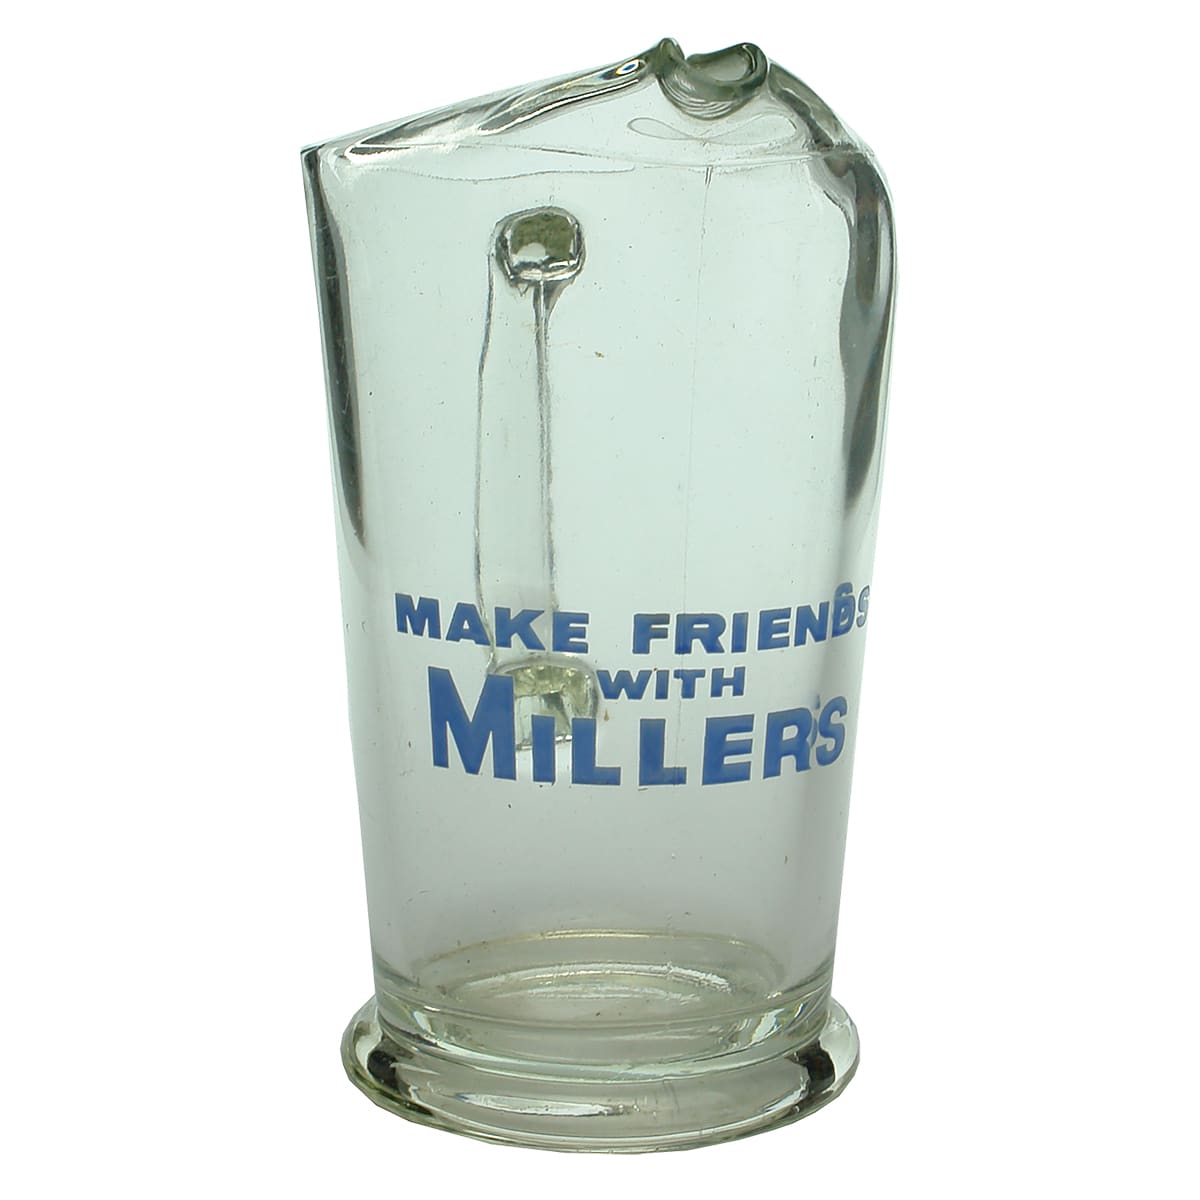 Beer Jug. Make Friends with Millers in blue print. (Sydney, New South Wales)